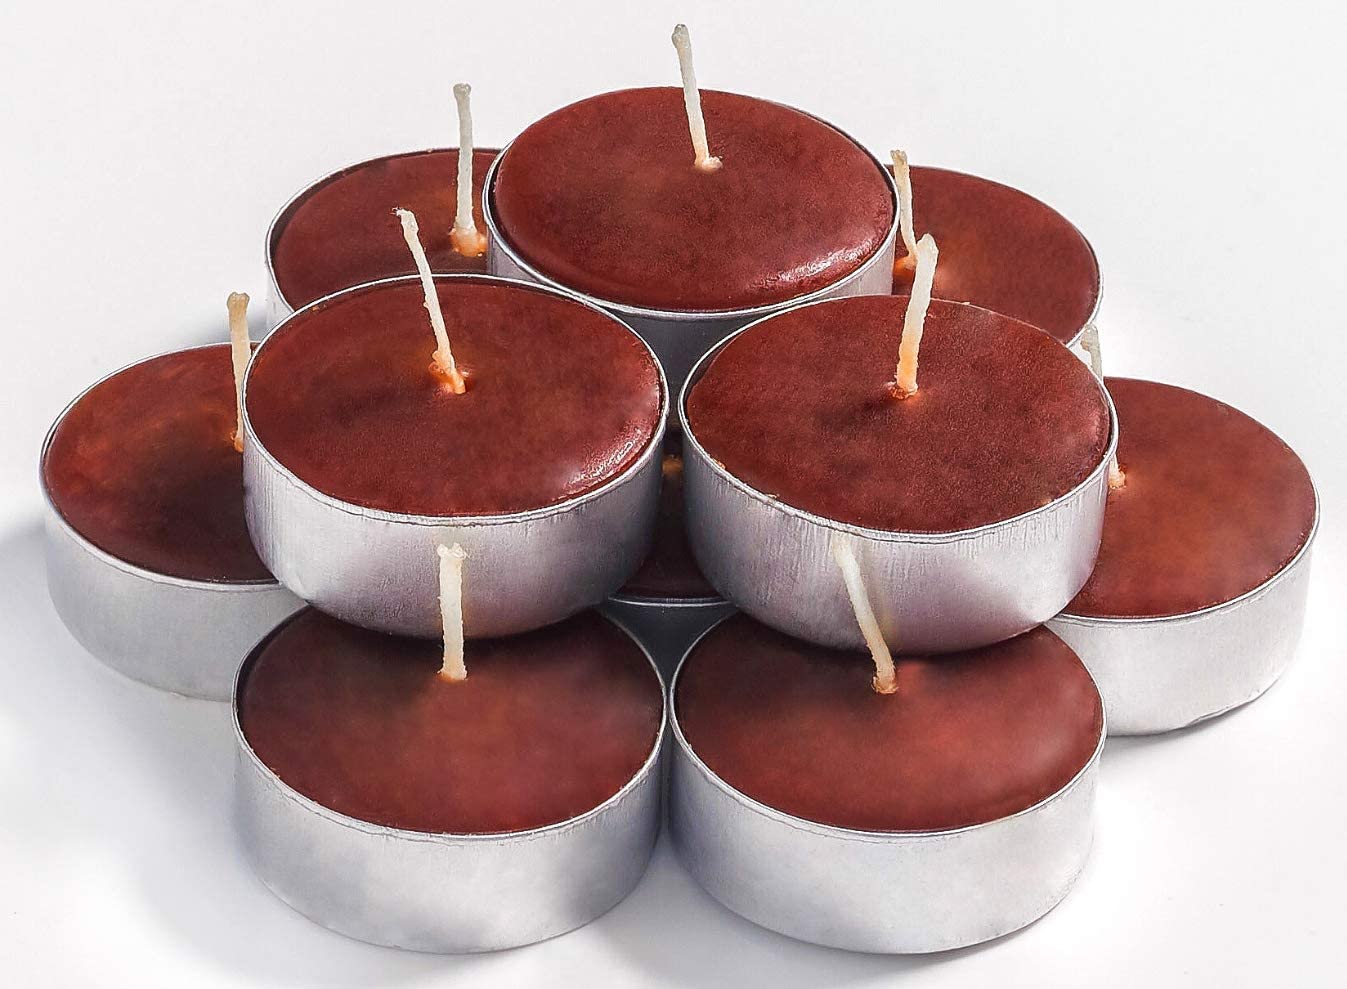 Black Cherry Scented Tealight Candles - 30 Pack